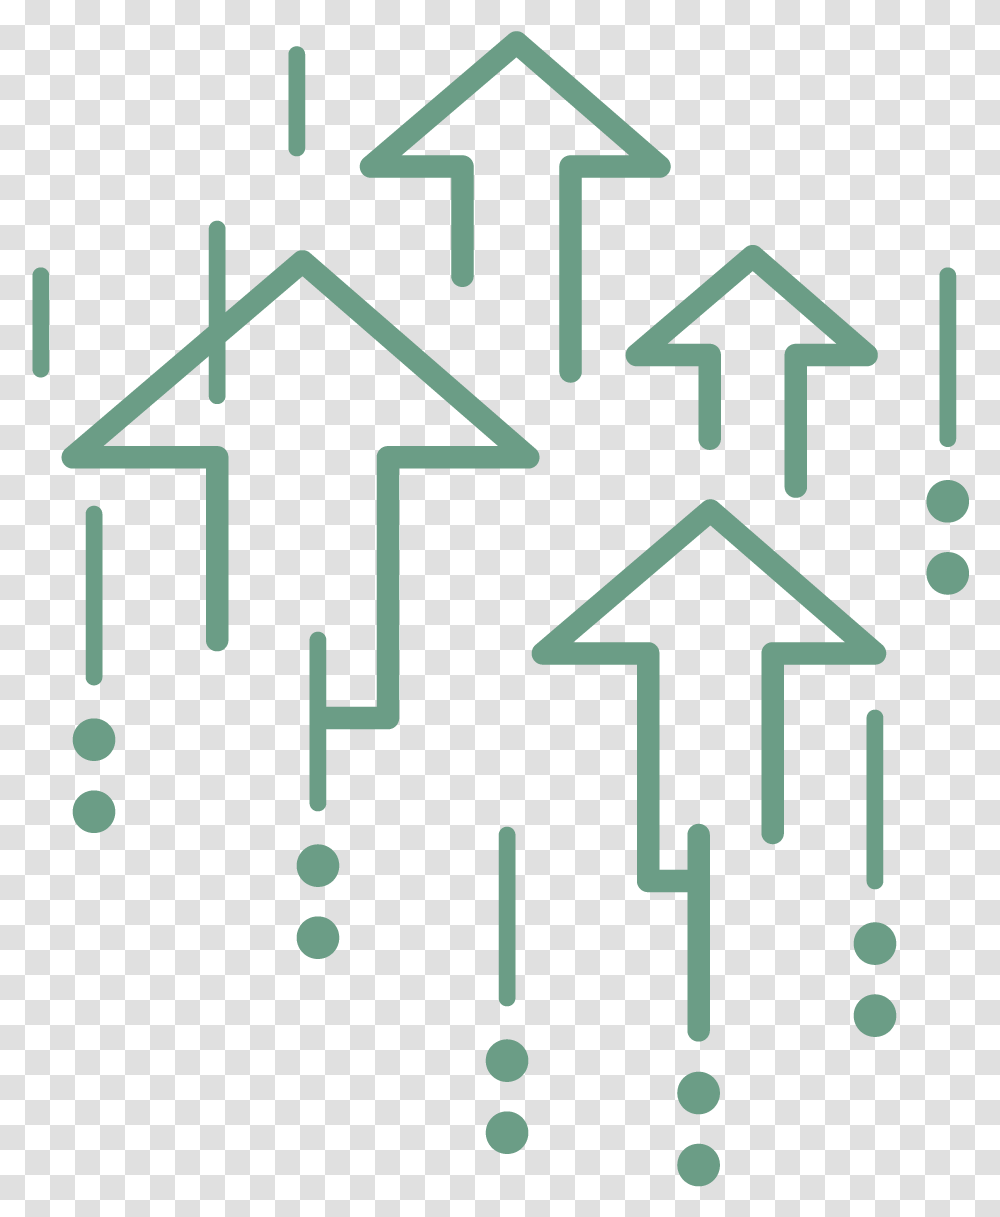 Four Arrows Pointing Up Denoting Kane Business Growth Upskill Icon In Background, Number, Recycling Symbol Transparent Png